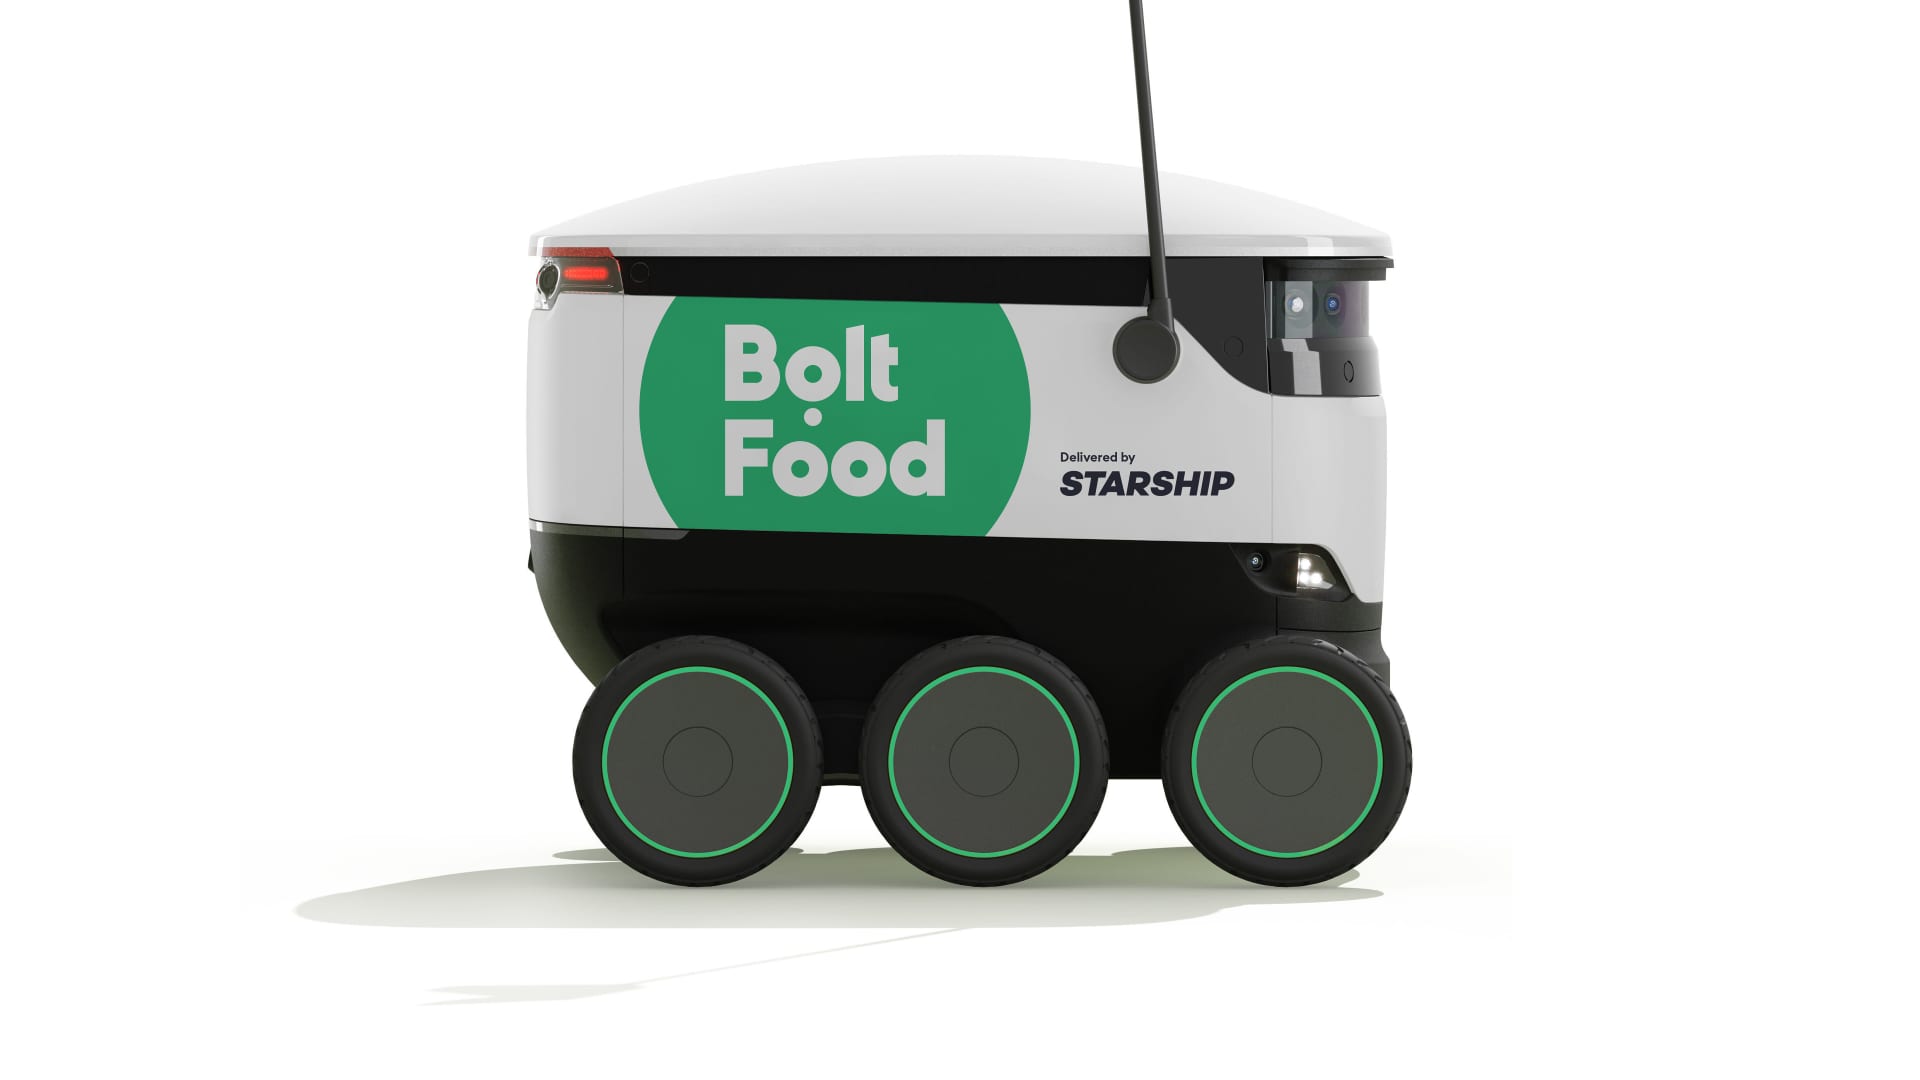 European Uber rival Bolt will deliver food to your door via self-driving robots